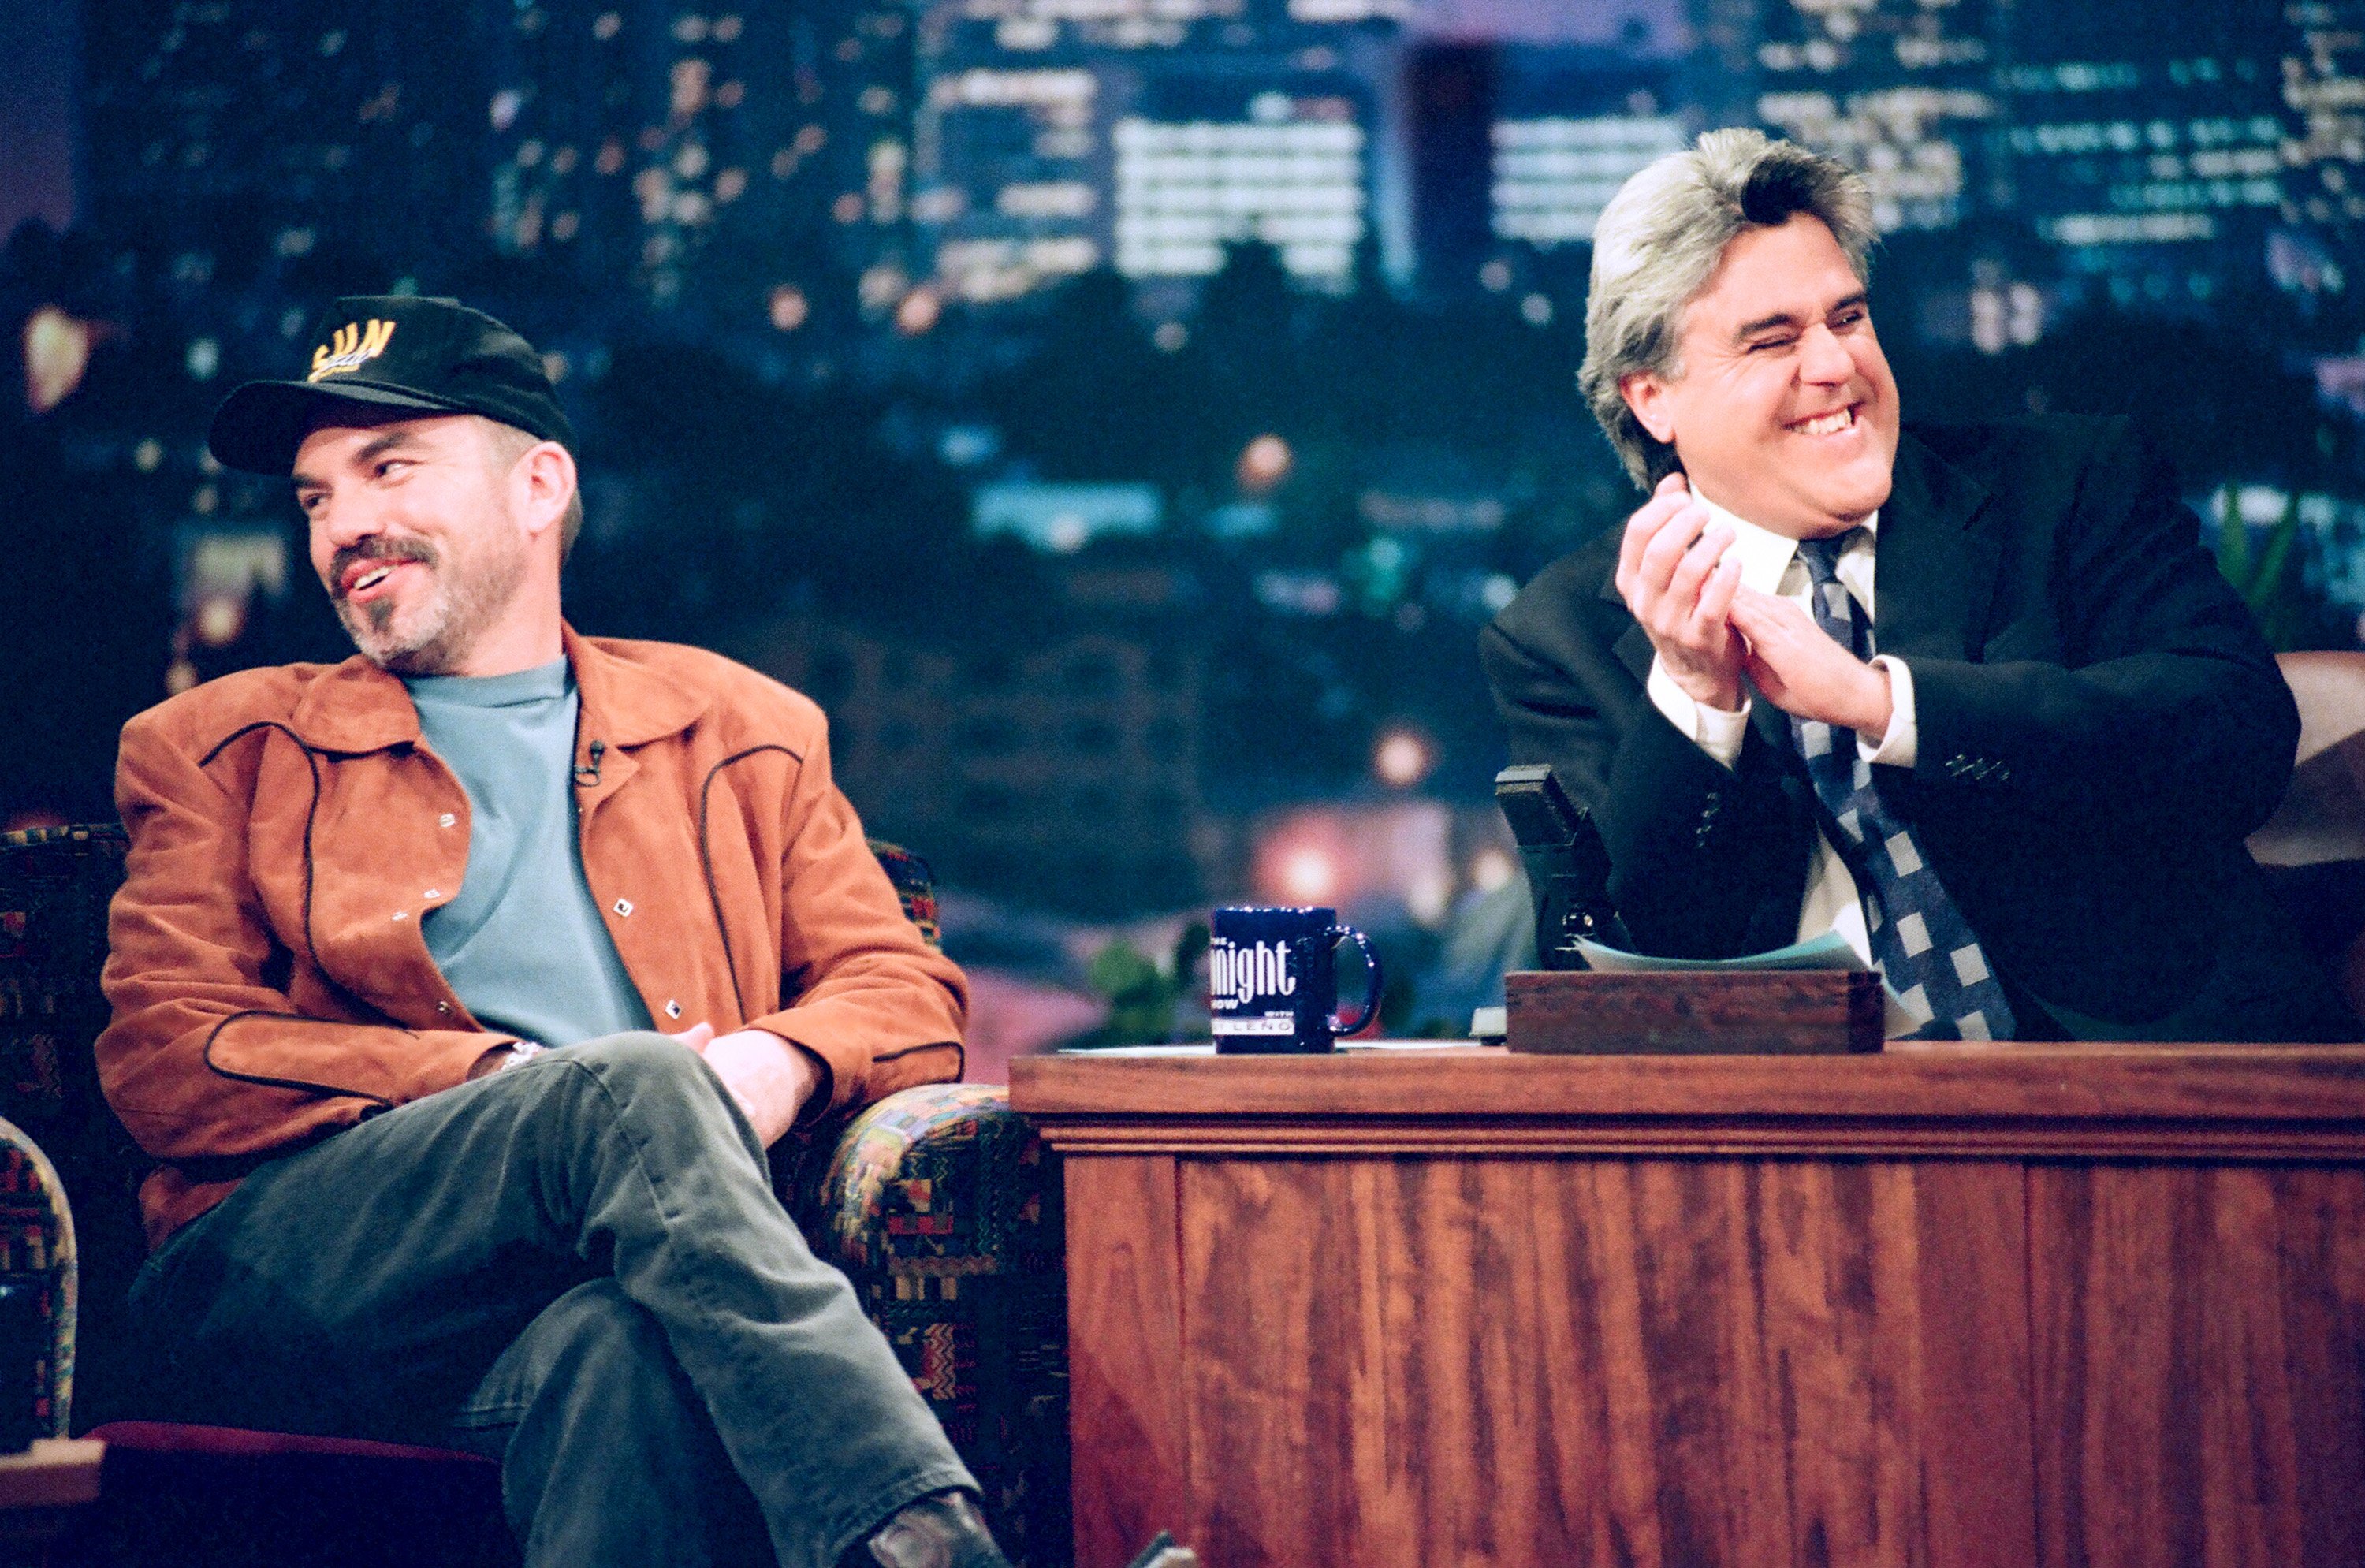 Billy Bob Thornton visiting 'The Tonight Show With Jay Leno' in 1997